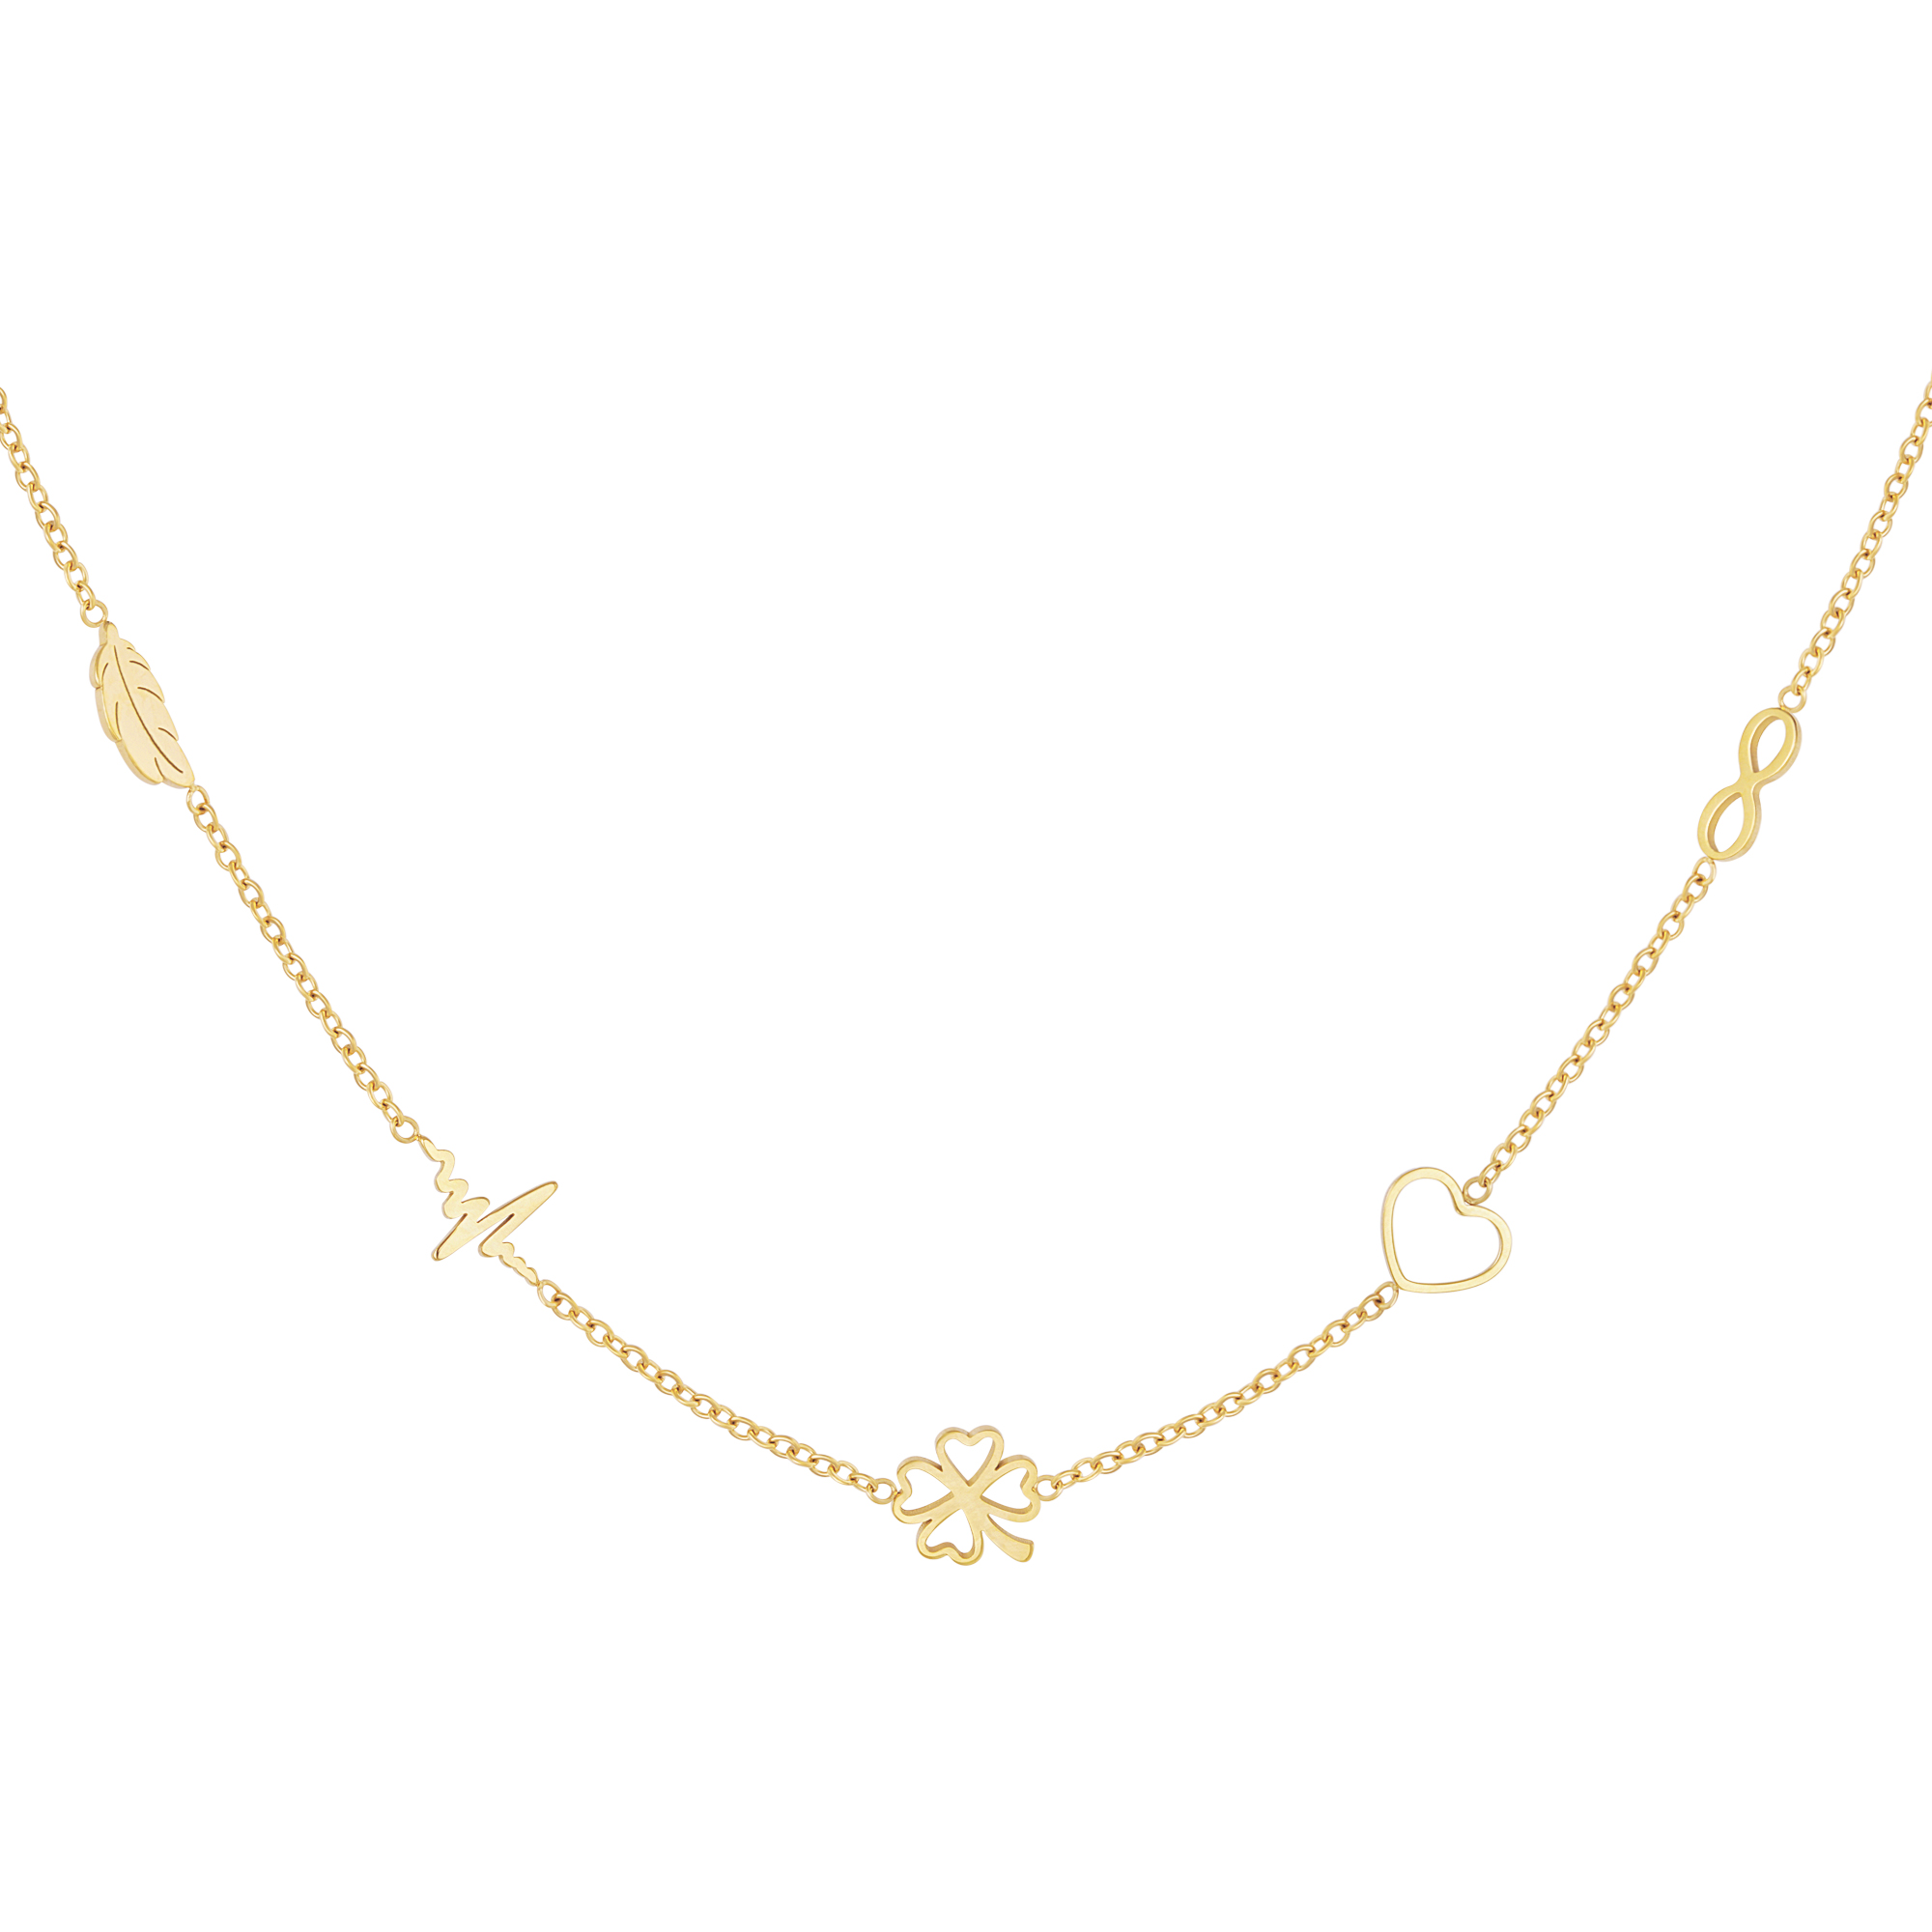 Minimalist necklace with charms